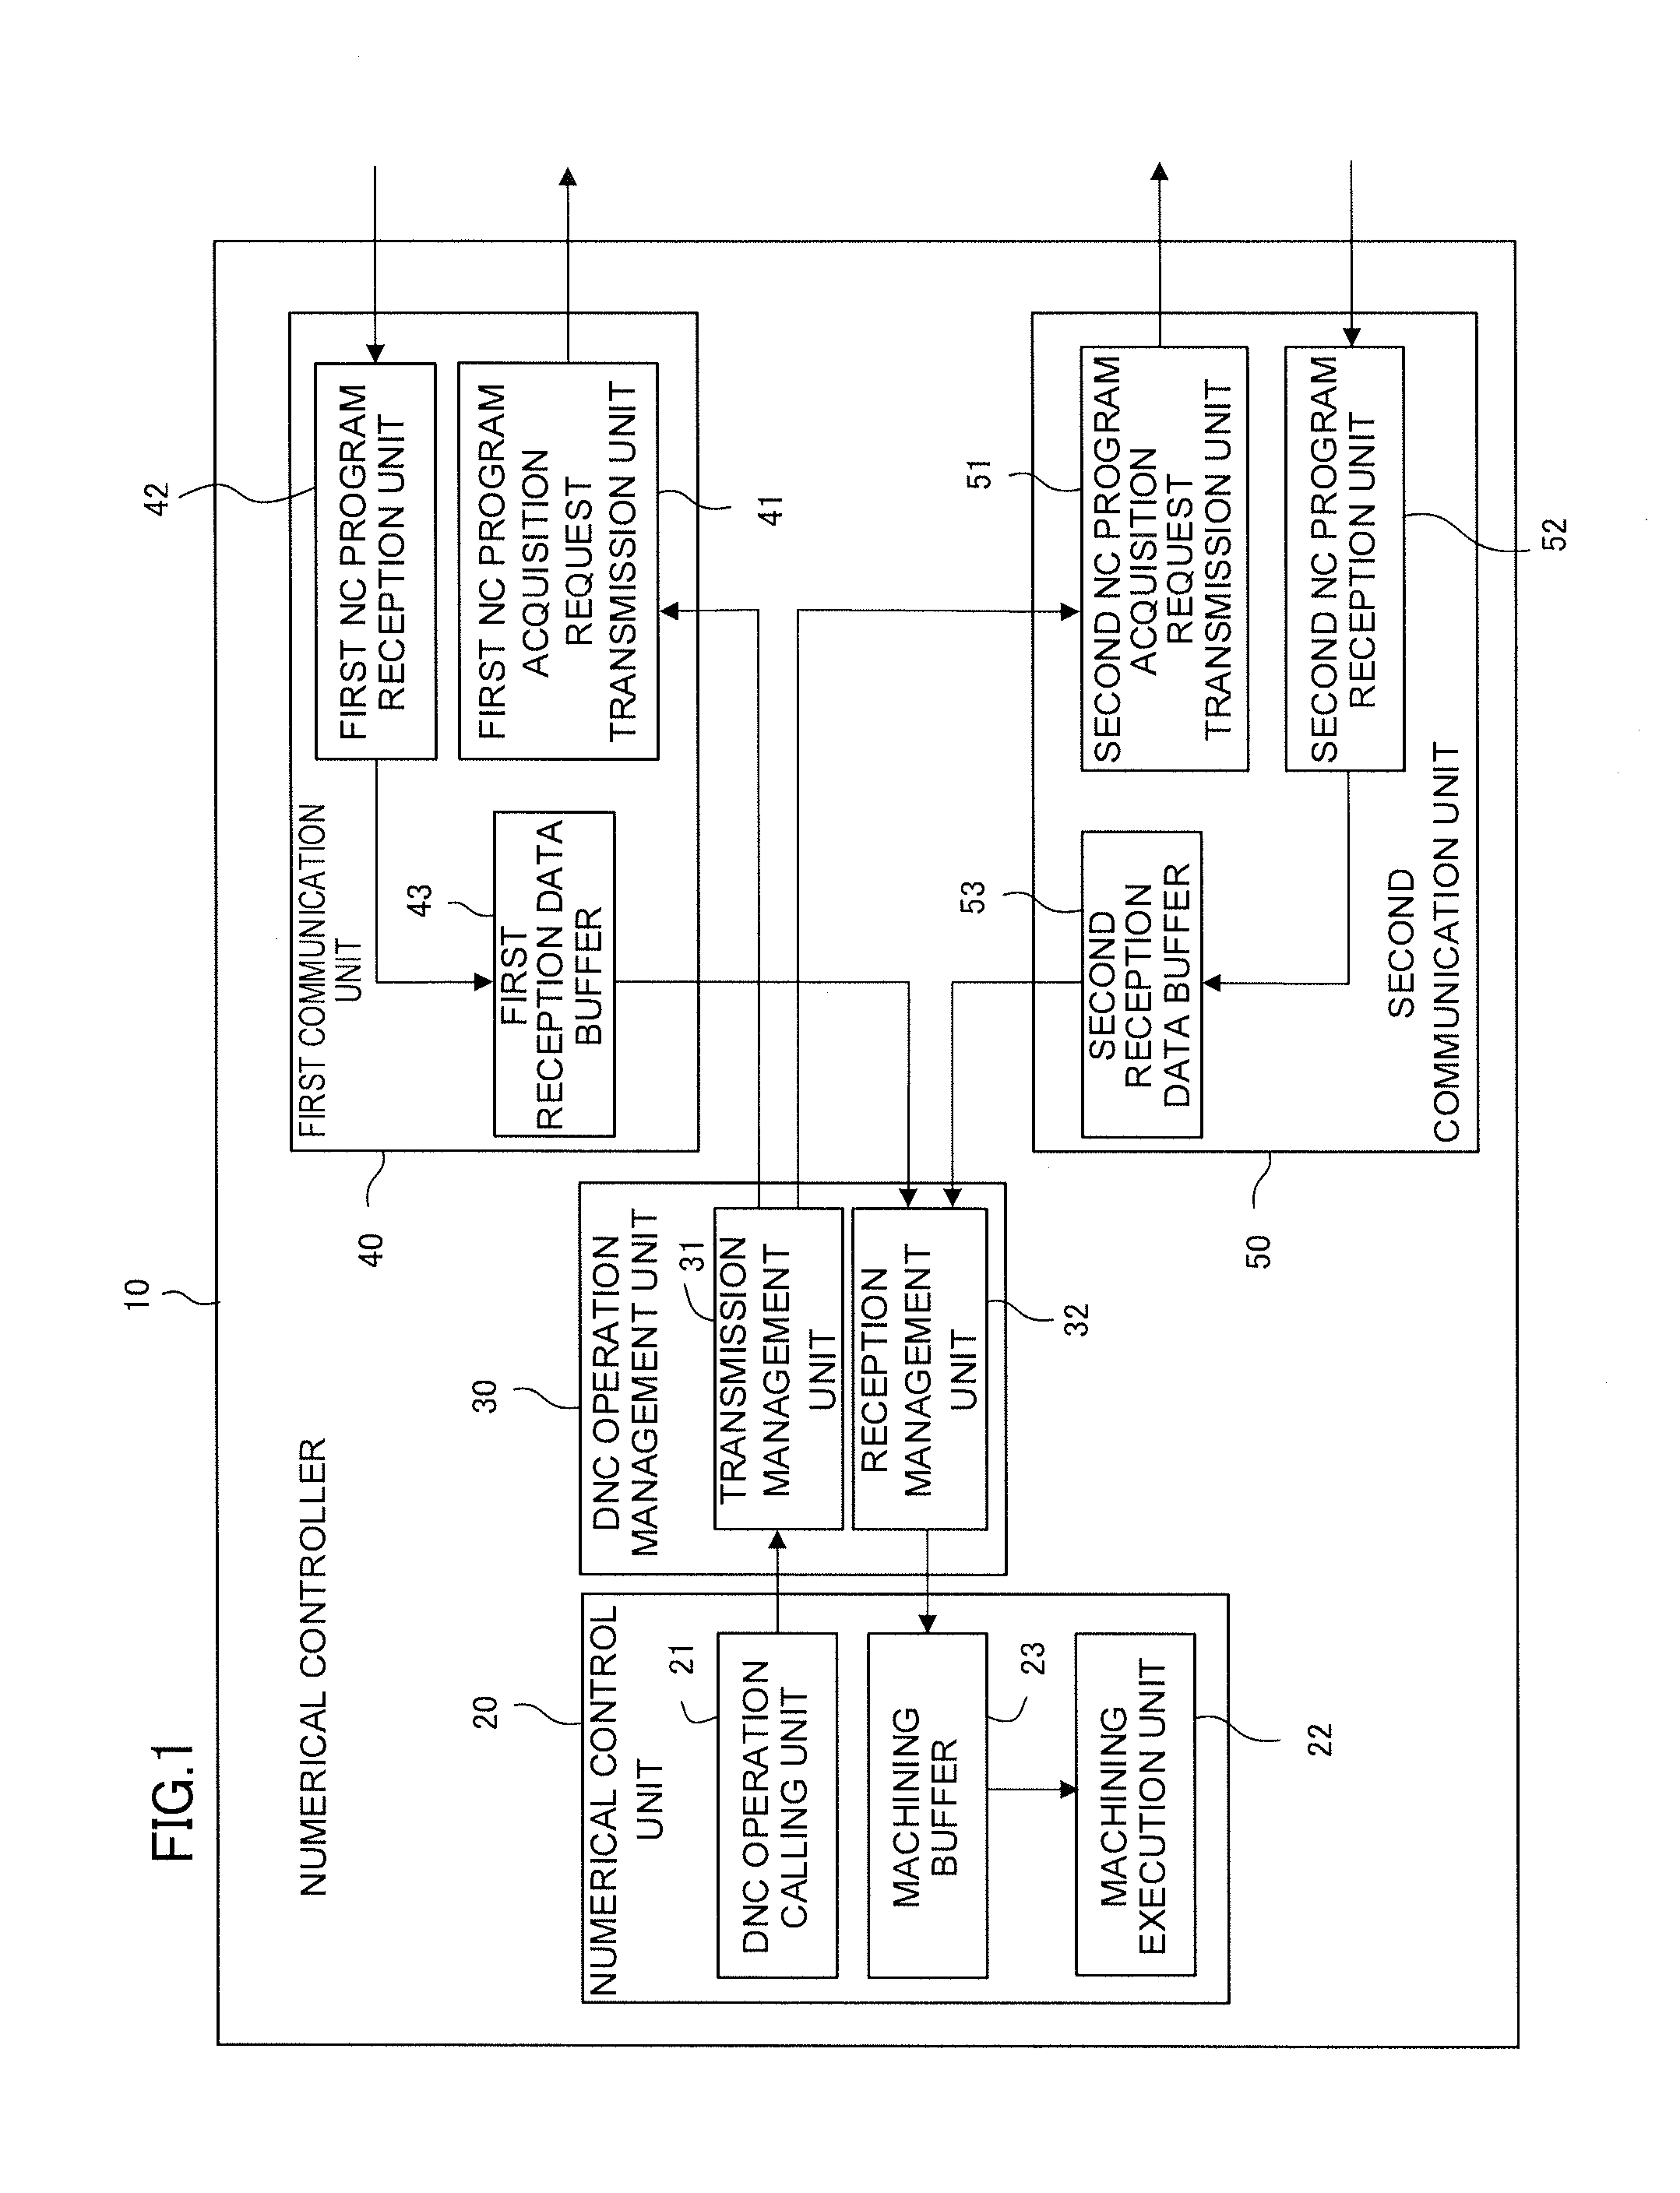 Numerical controller with dnc operation function using a plurality of communication lines